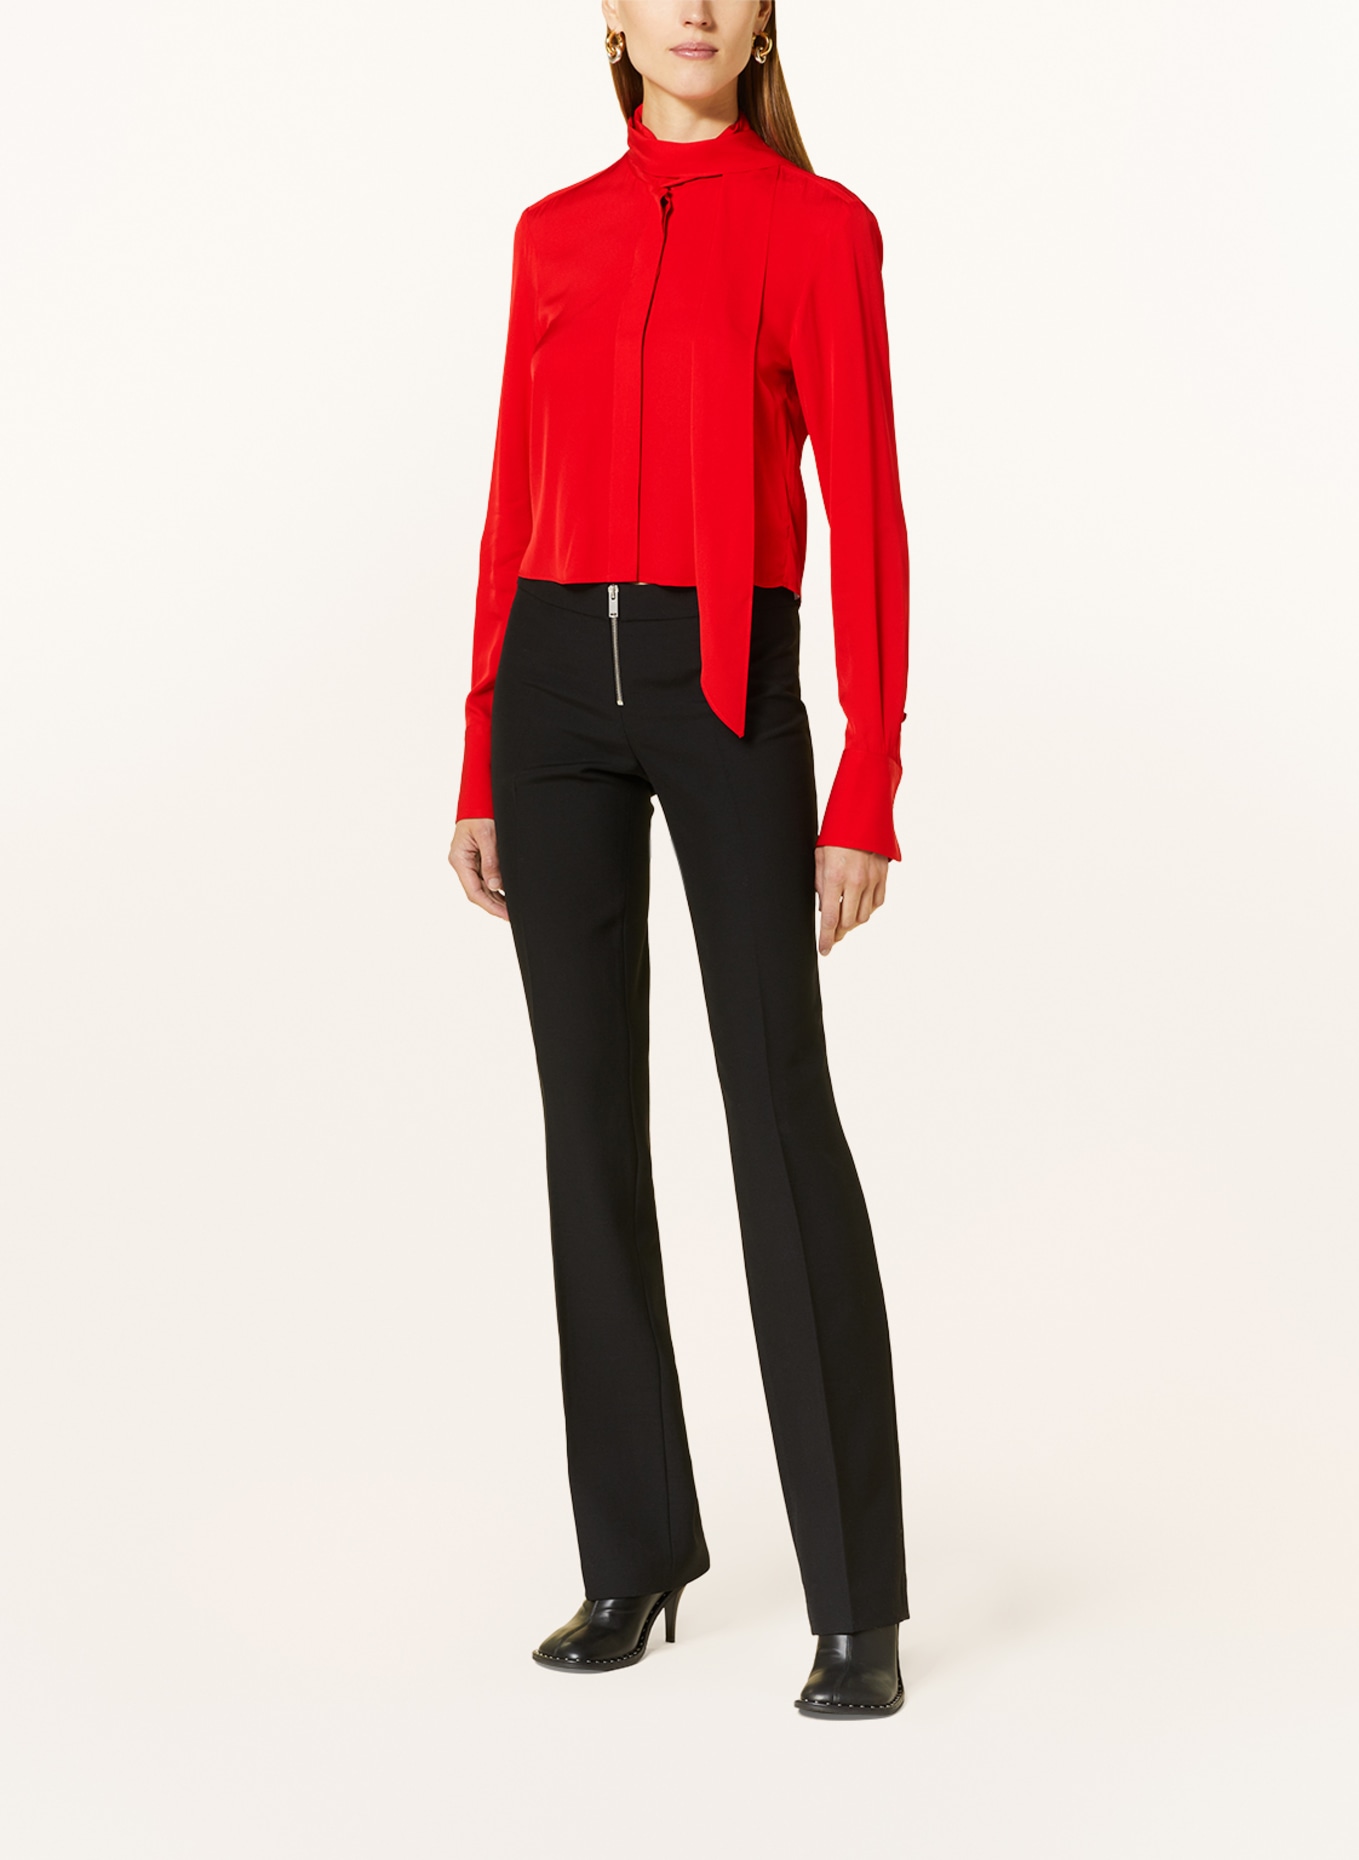 STELLA McCARTNEY Bow-tie blouse, Color: RED (Image 2)